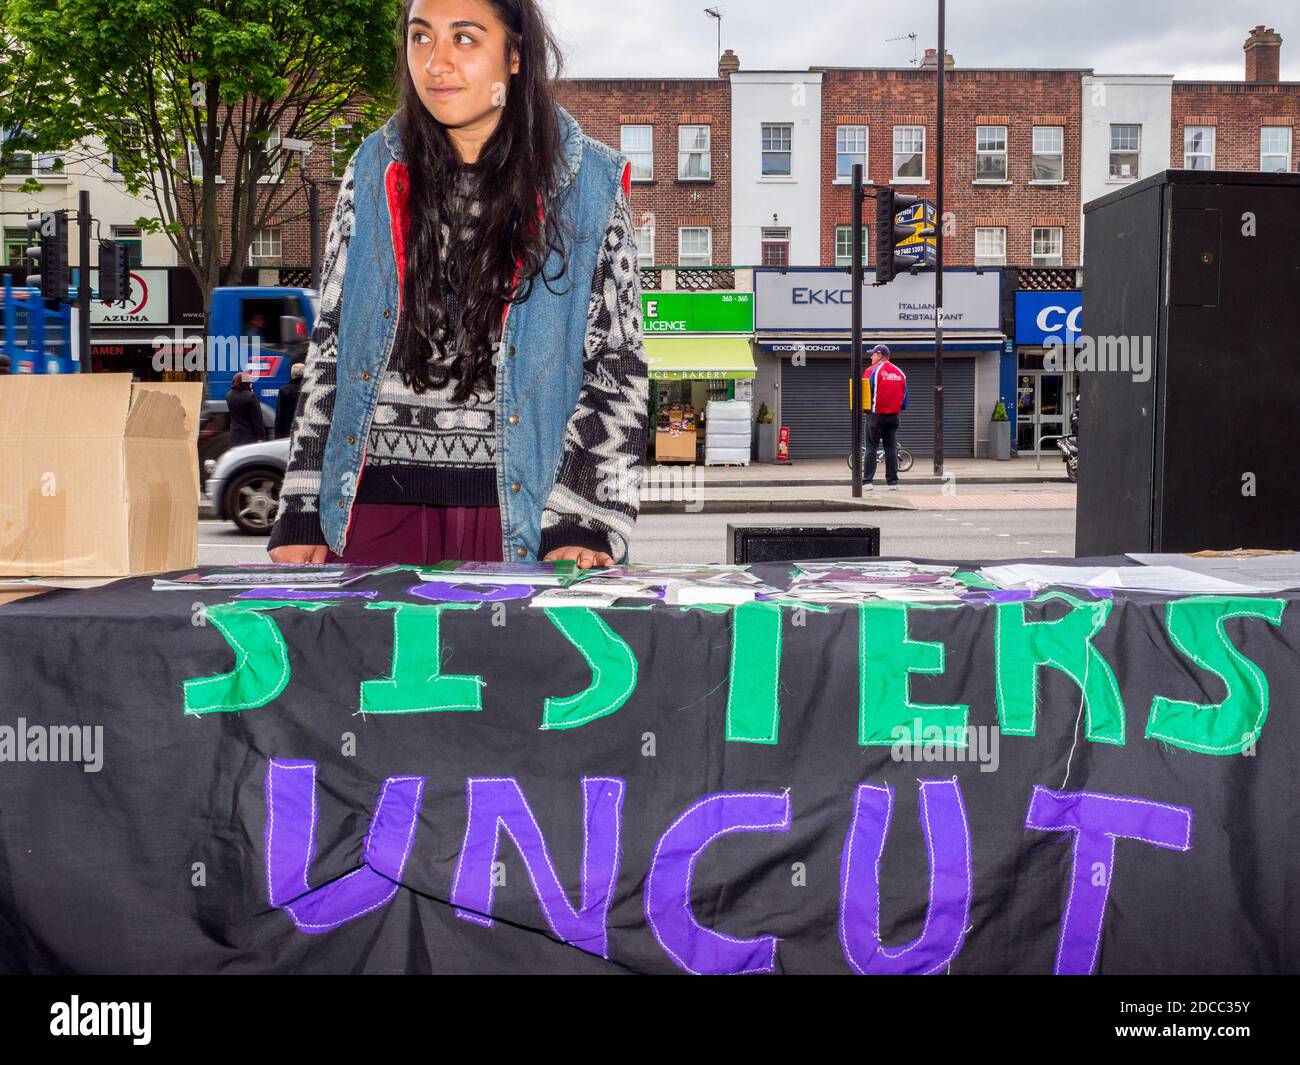 25 year old, self-employed Kelsey, raising awareness for Sisters Uncut, a feminist group taking direct action for domestic violence services. Stock Photo